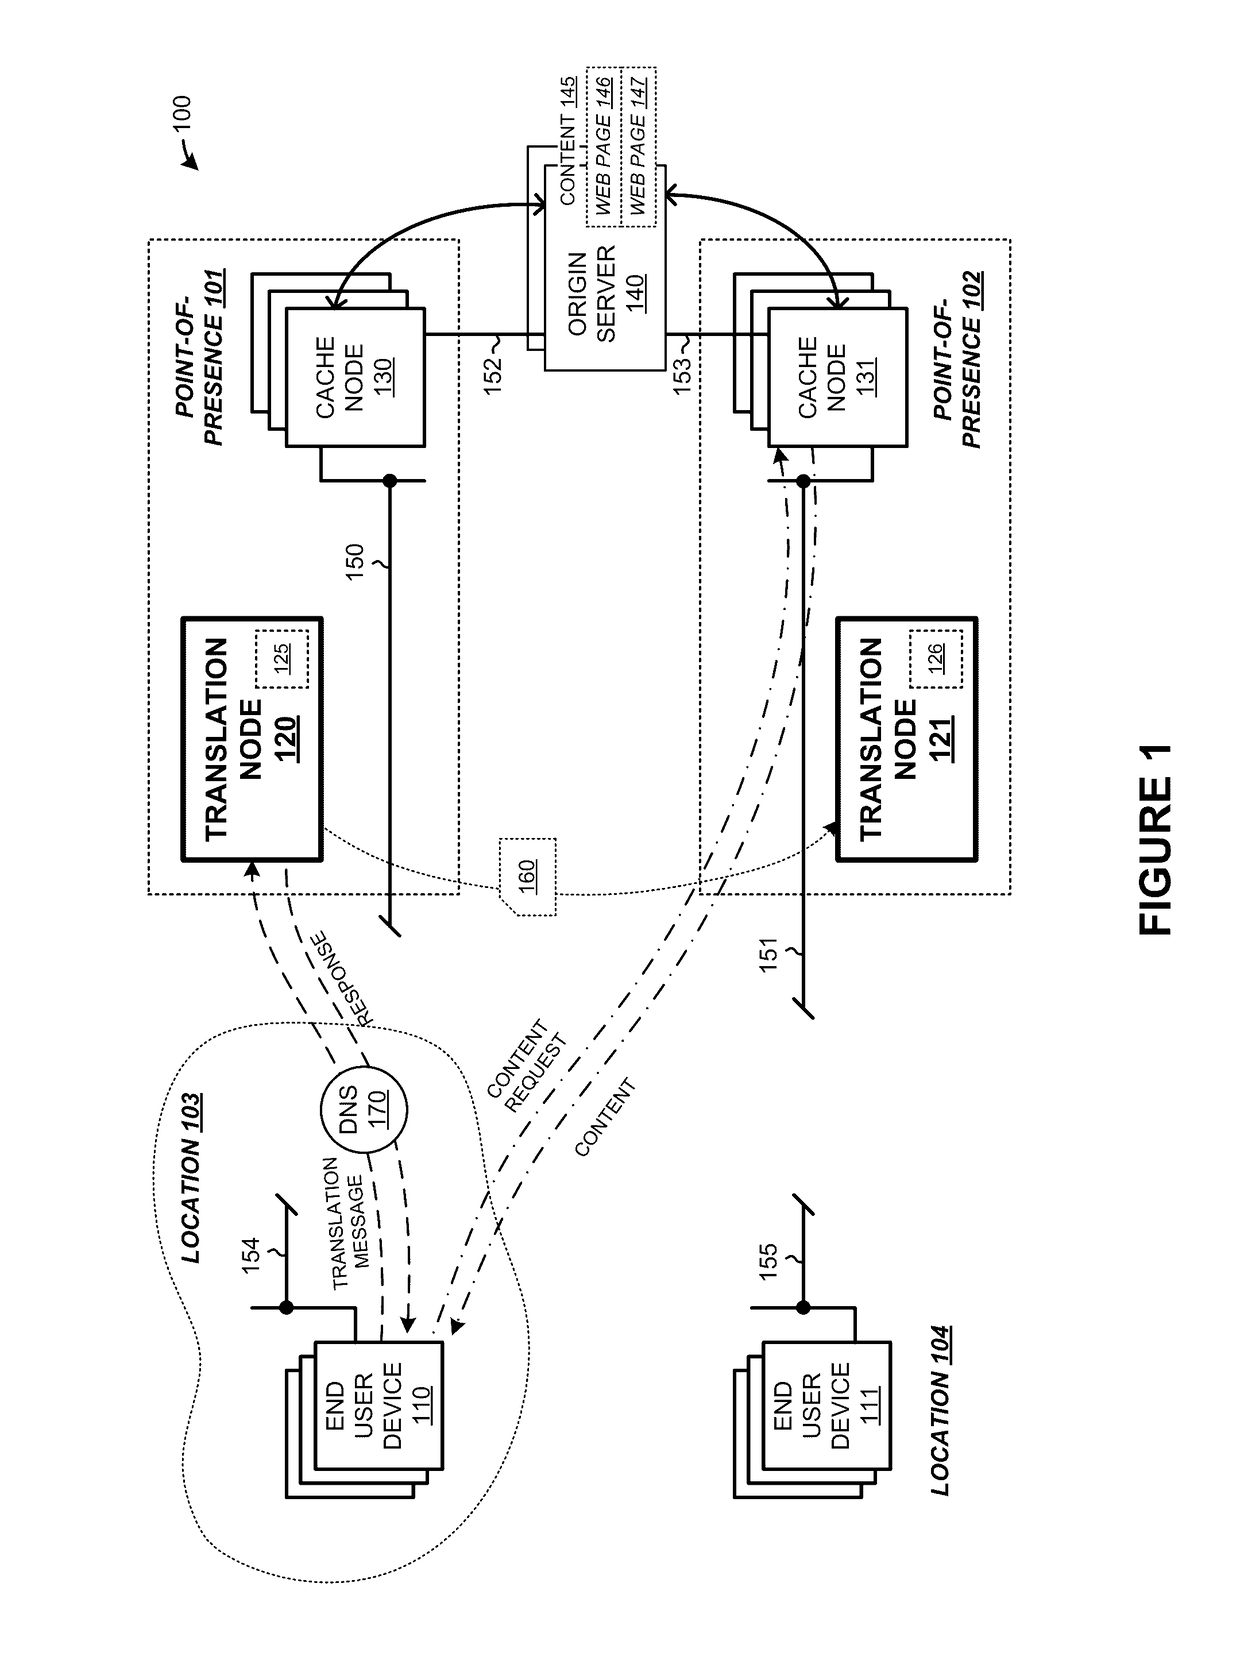 Enhanced domain name translation in content delivery networks